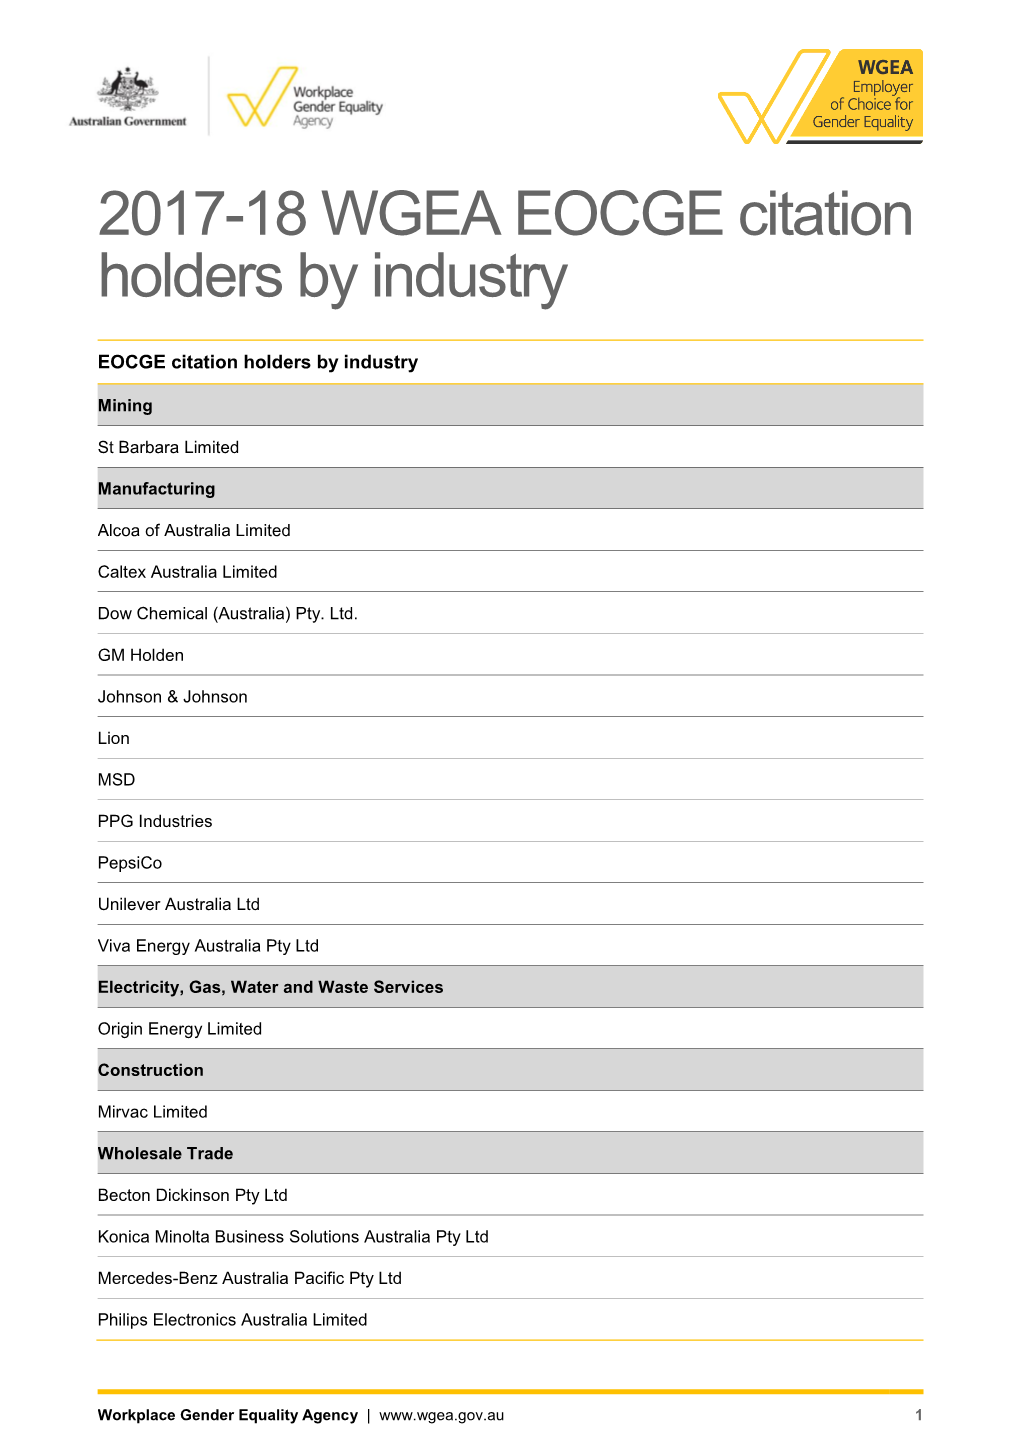 2017-18 WGEA EOCGE Citation Holders by Industry